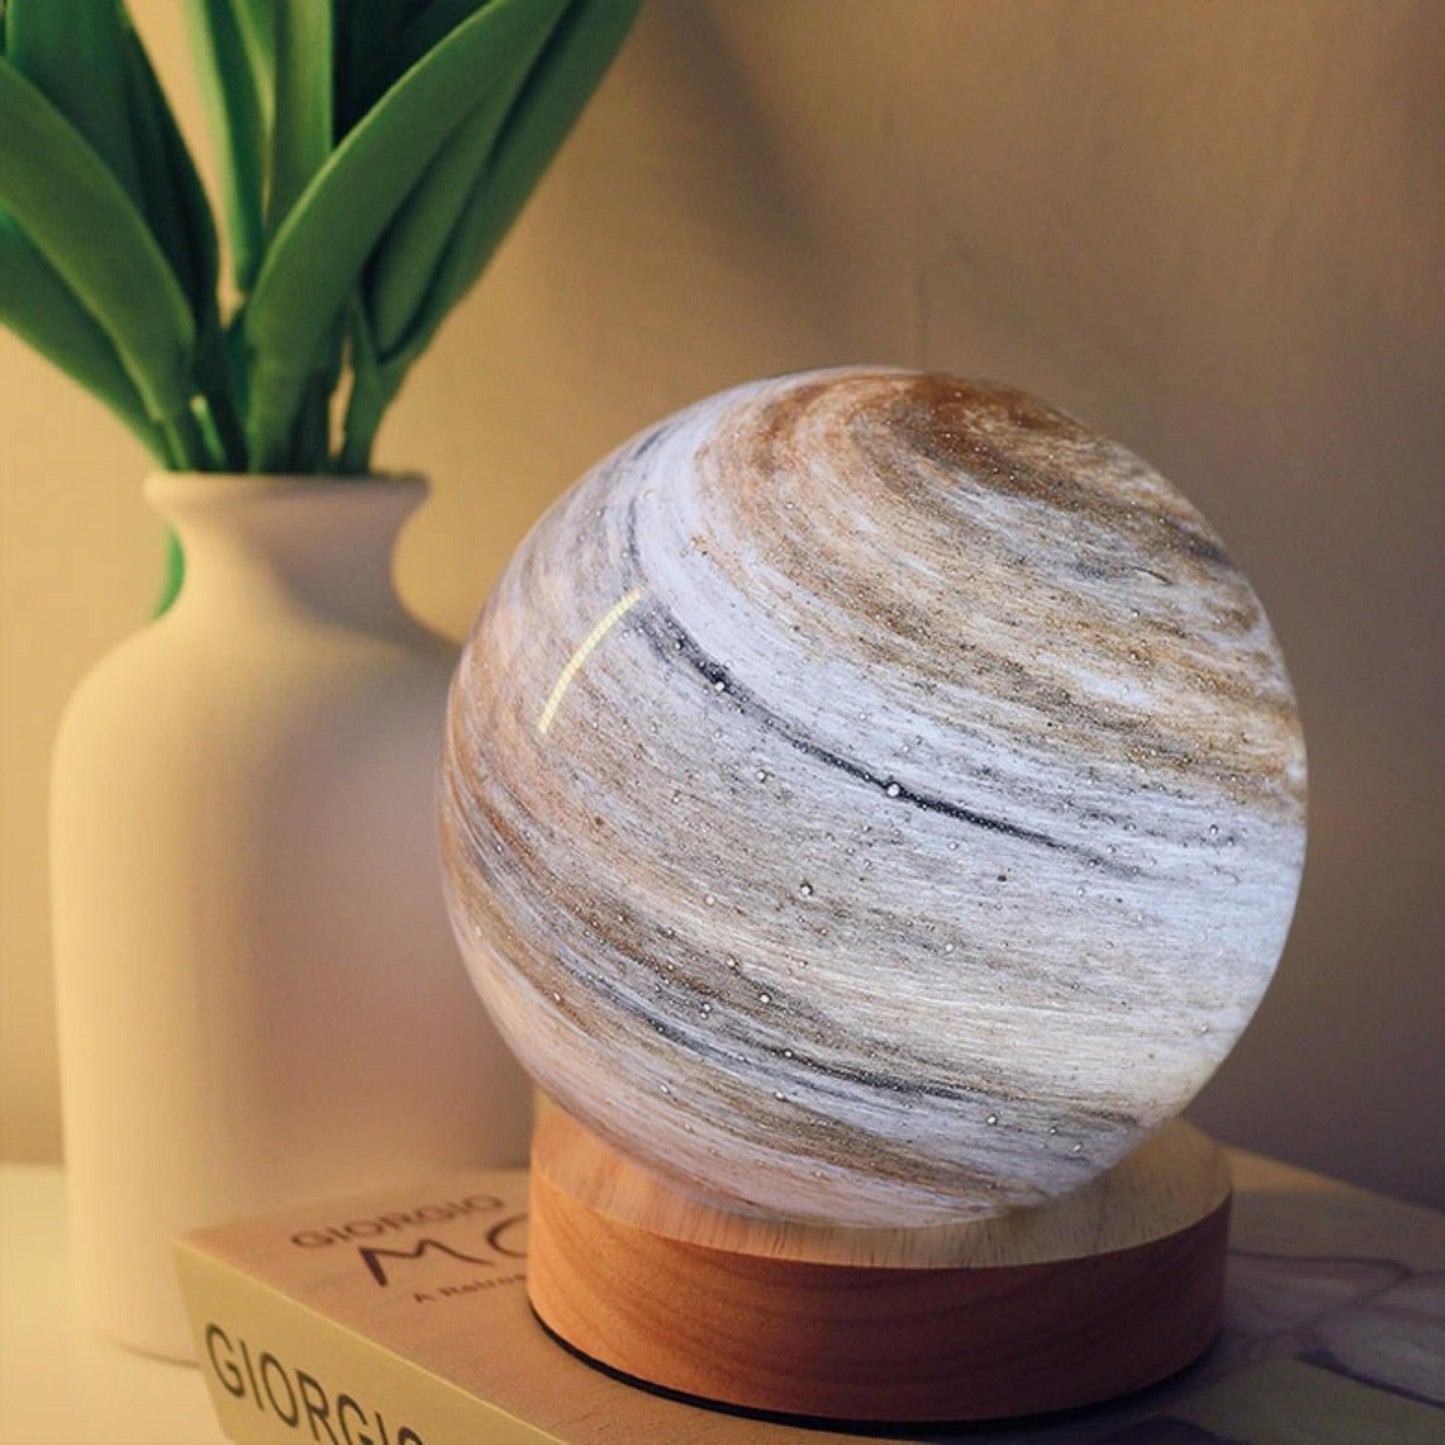 Jupiter Planet Lamp - Space Mesmerise - Space Gifts | Lamps | Statues | Home Decor